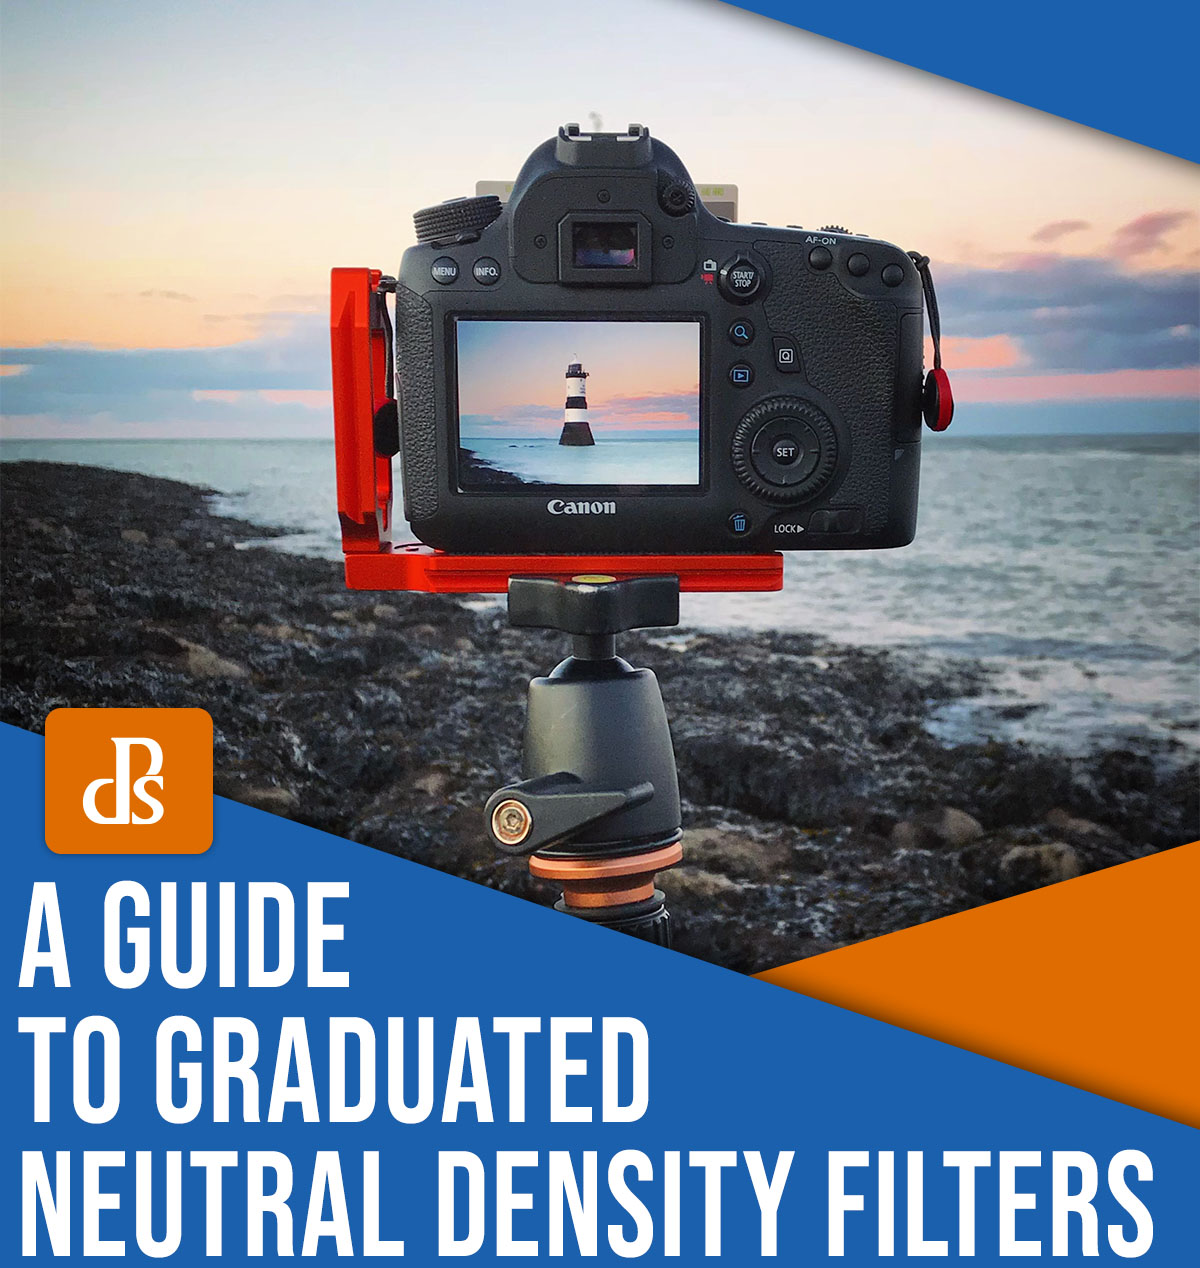 A guide to graduated neutral density filters